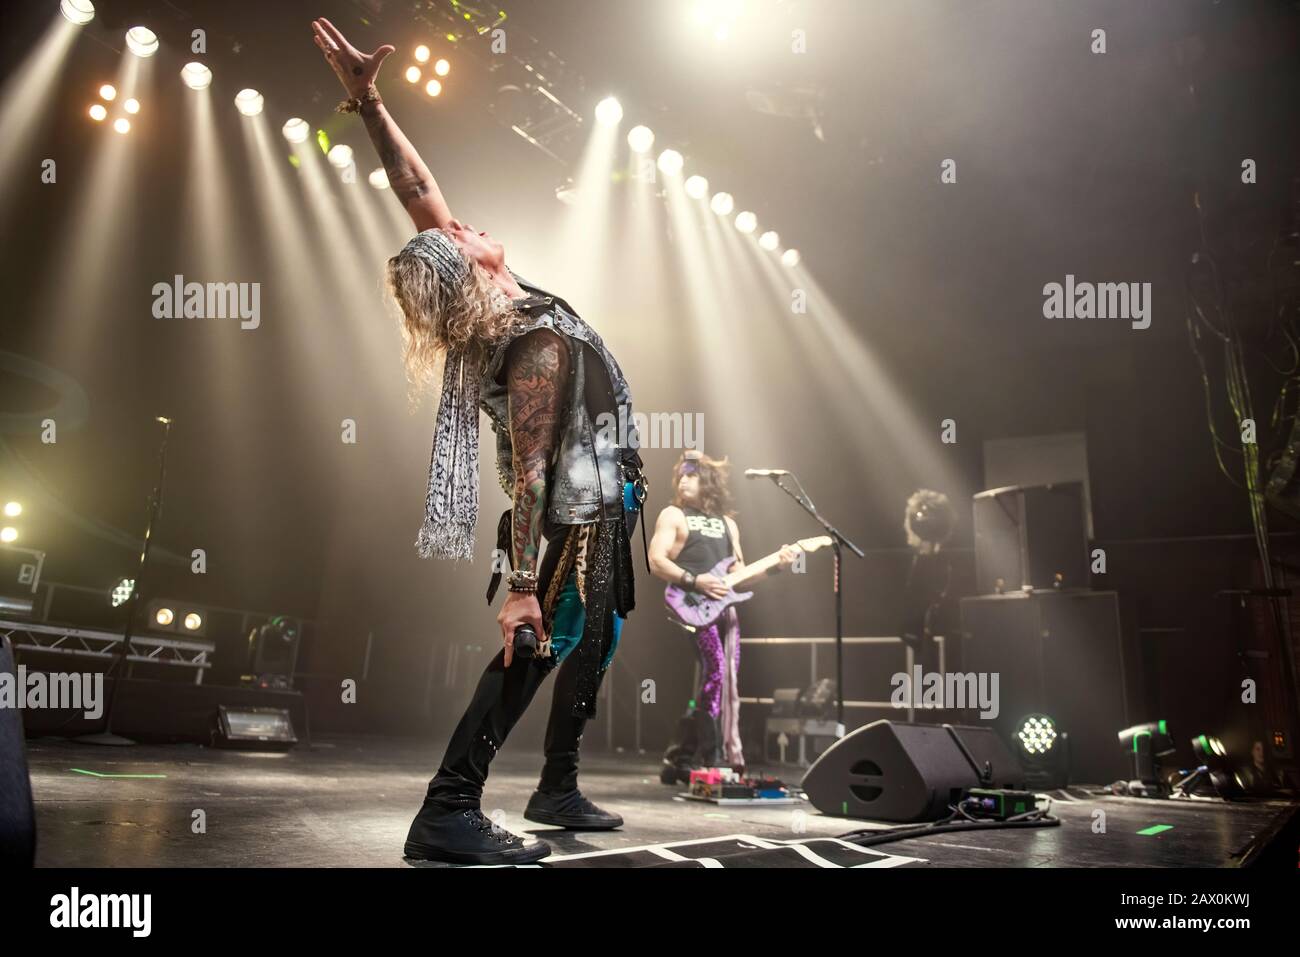 Manchester, UK. 09th February 20120. Michael Starr,  Satchel, Lexxi Foxx and Stix Zadinia of the band Steel Panther perform at the O2 Victoria Warehouse, Manchester on their  “ Heavy Metal Rules “ UK tour, Manchester 2019-02-09 . Credit:  Gary Mather/Alamy Live News Stock Photo